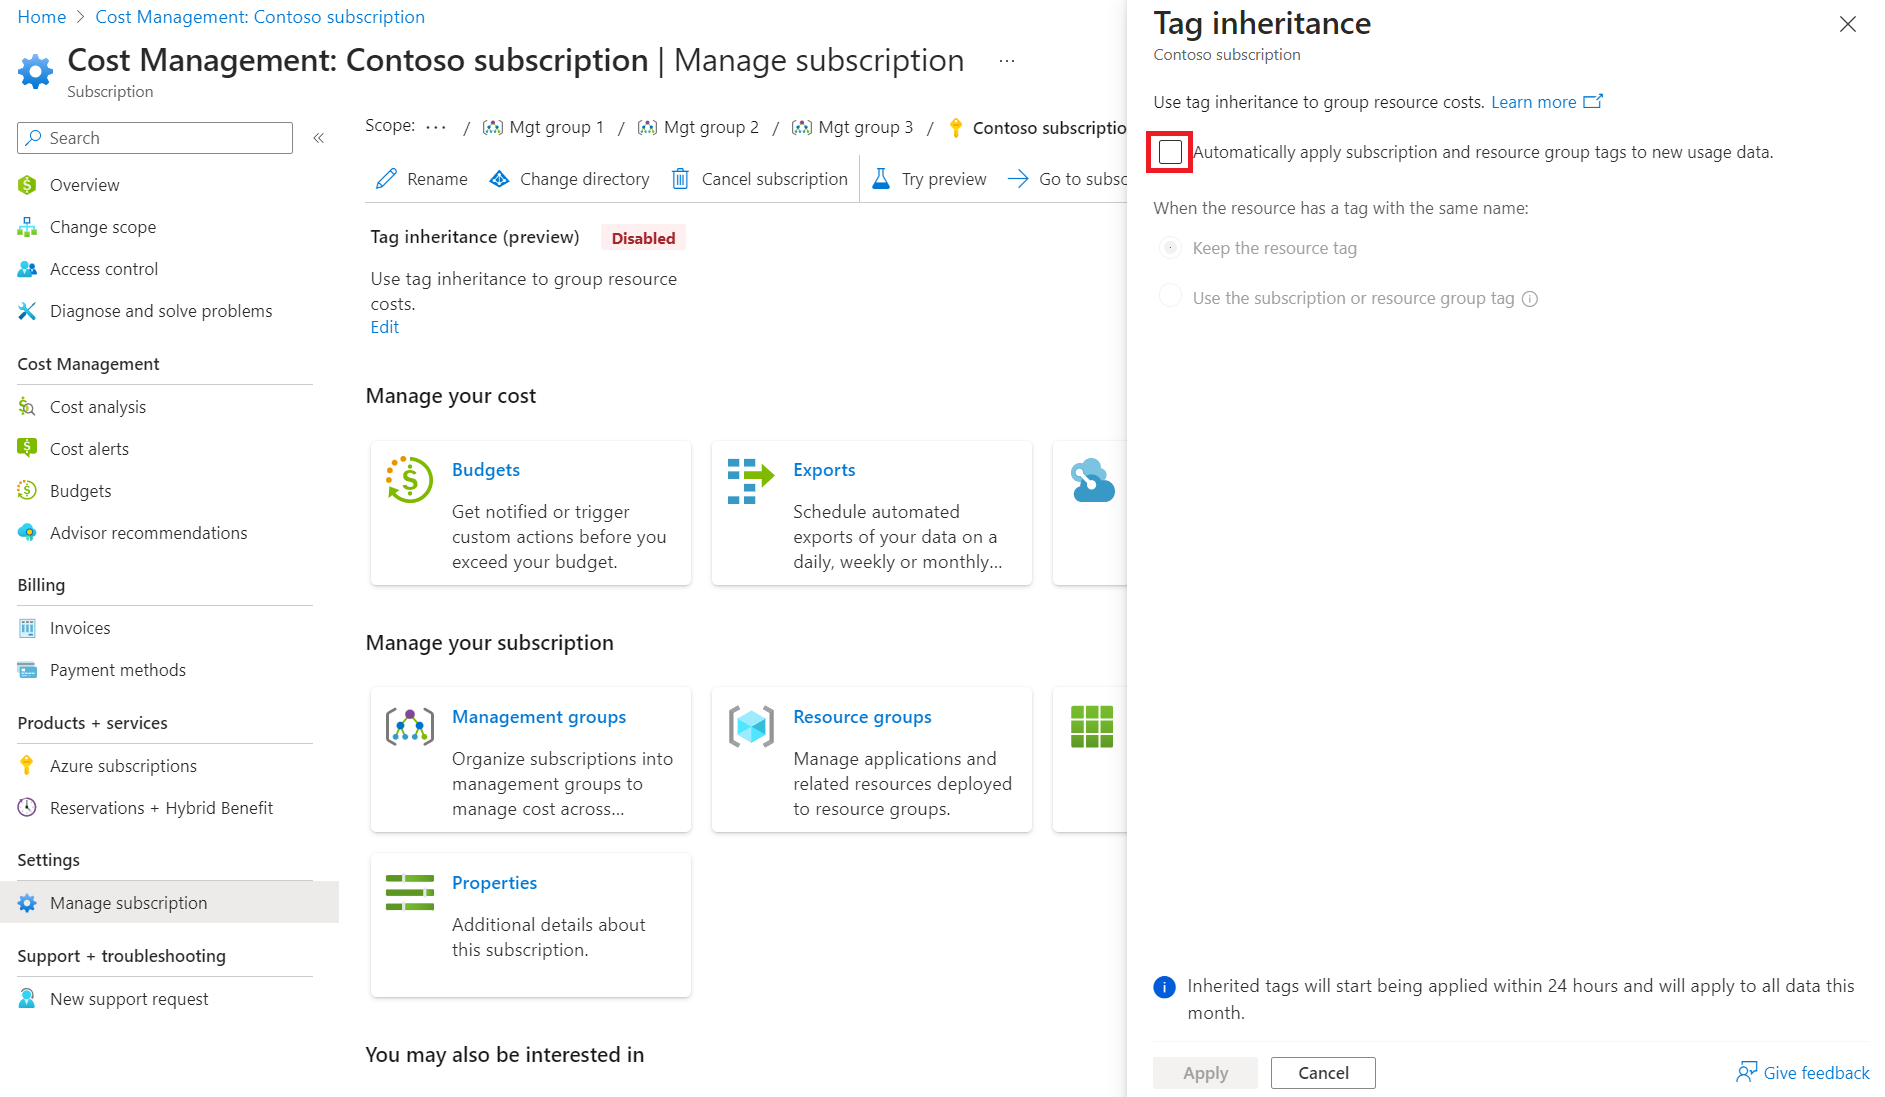 Screenshot showing the Automatically apply subscription and resource group tags to new data option for a subscription.